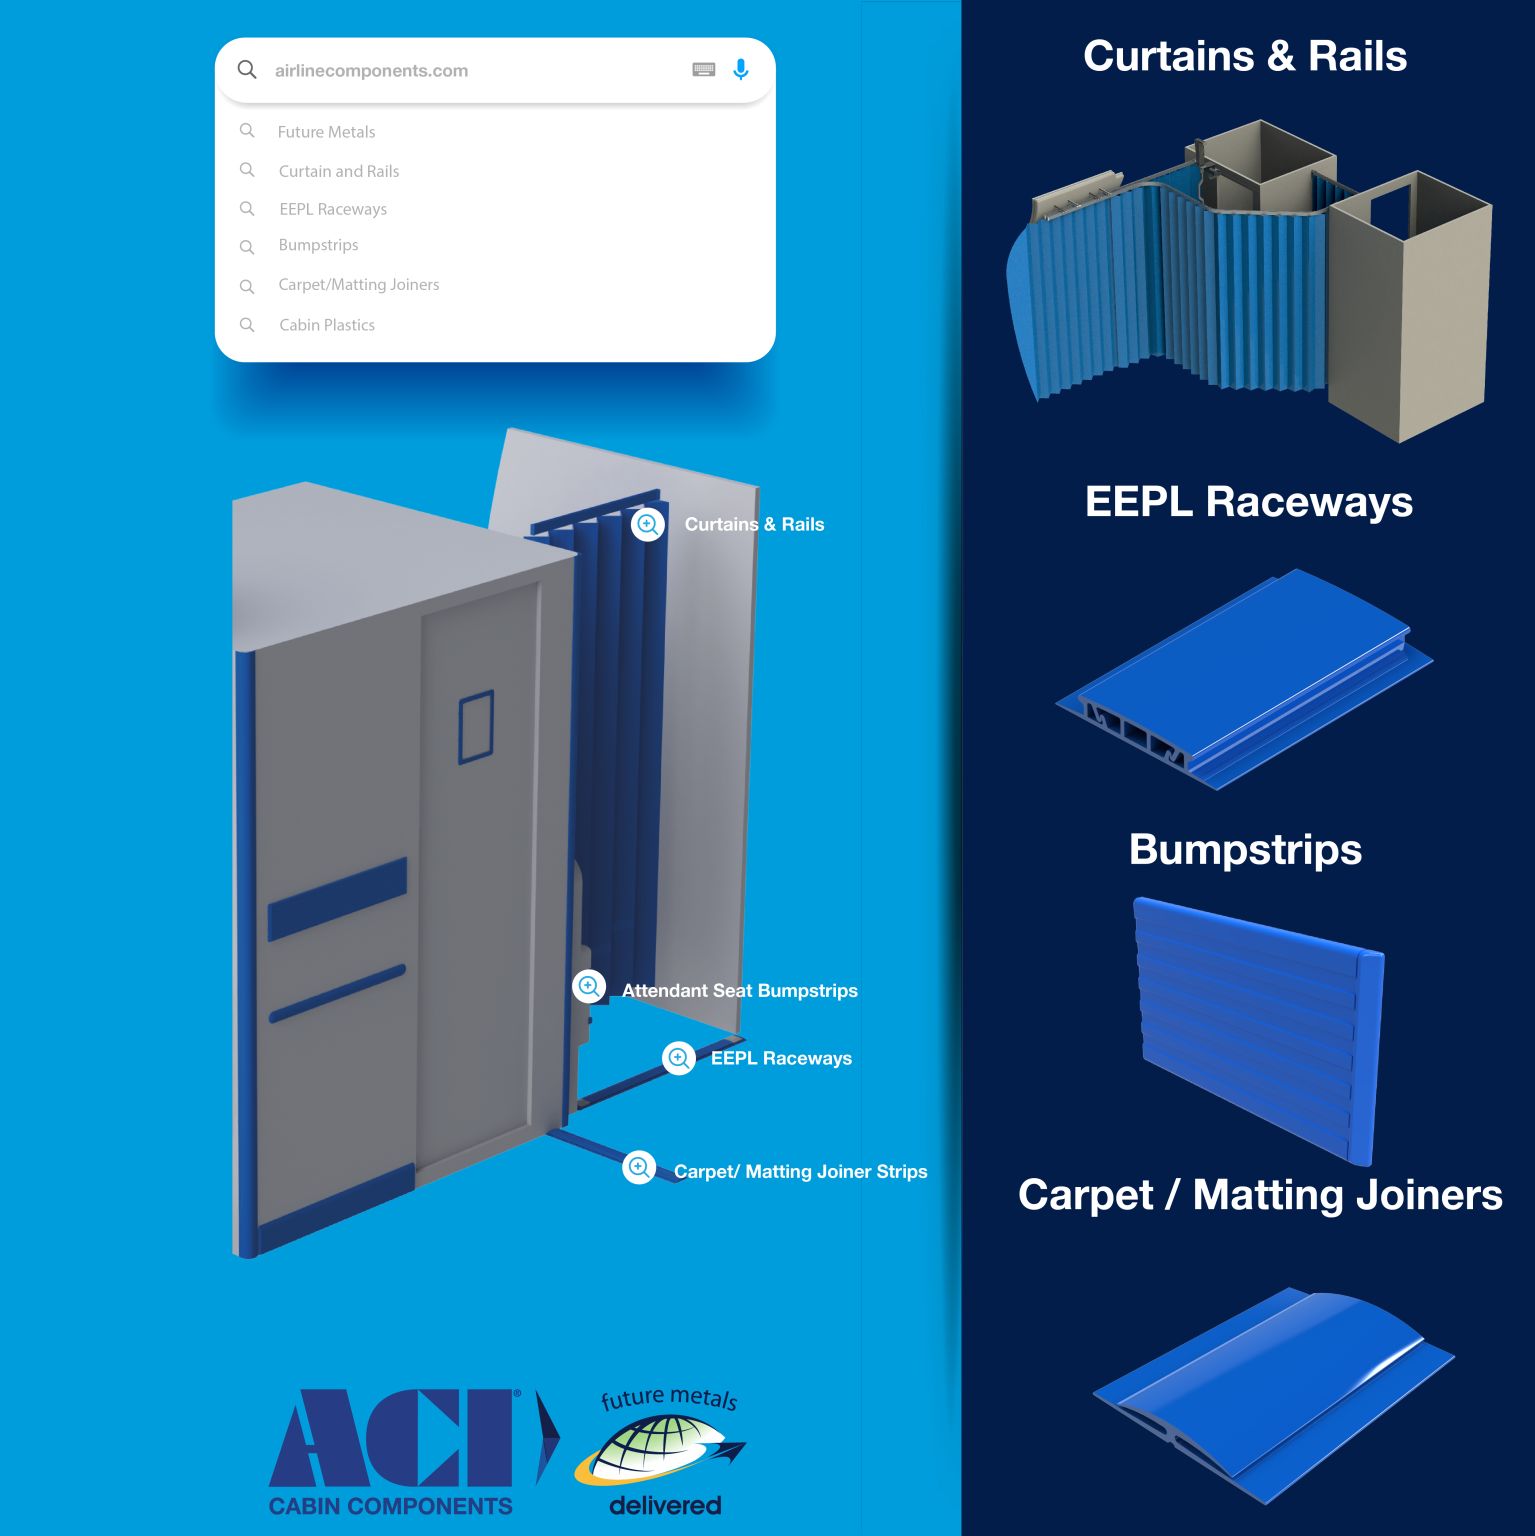 Extrusions, aircraft, aerospace, metal supplier, metals Future Metals presents ACI cabin components: aerospace-grade alloys for curtains, rails, extrusions, and joiners.